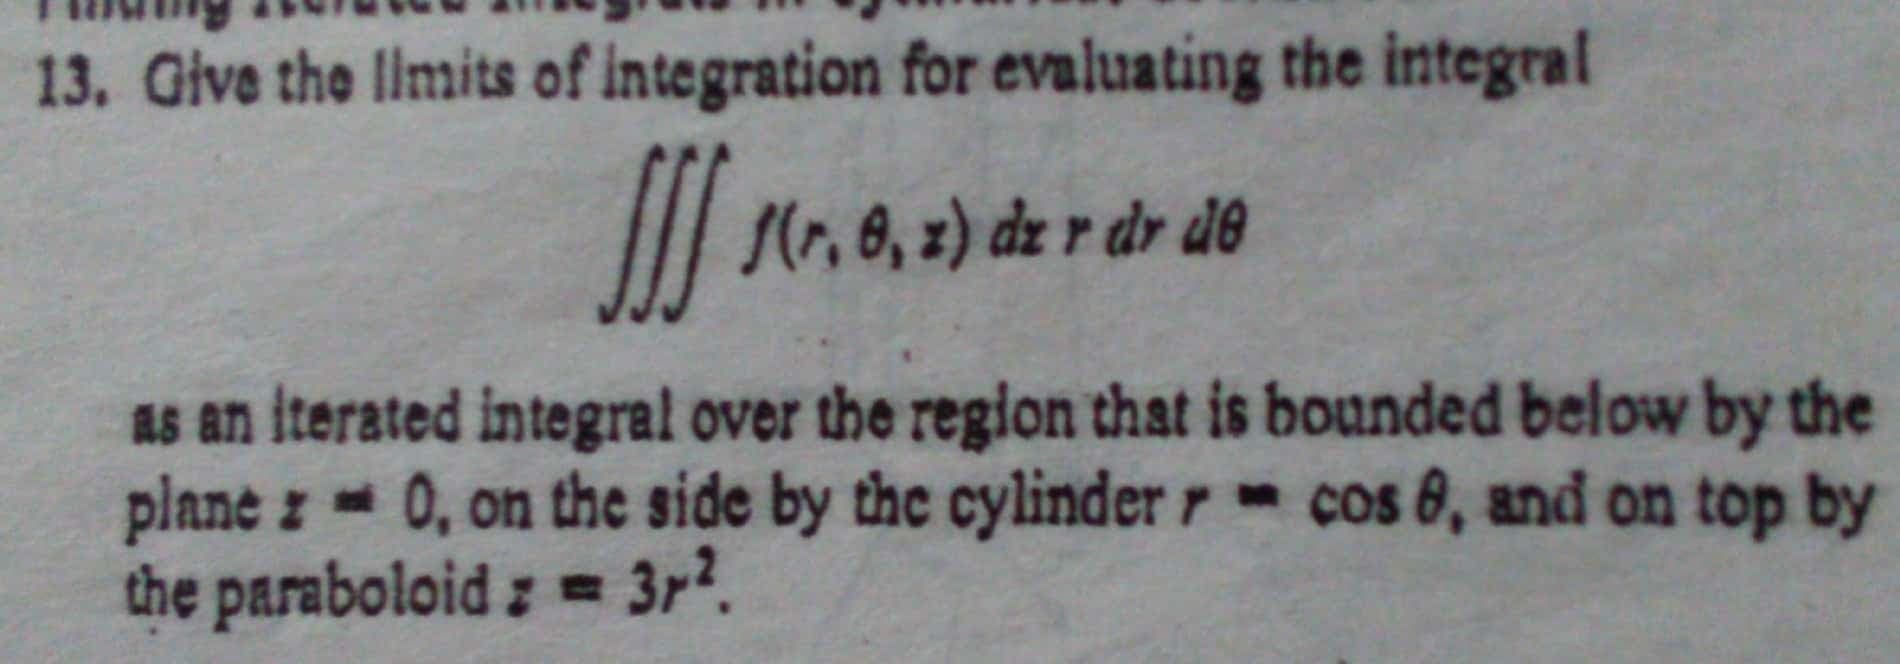 Give the limits of integration for evaluating the integral
s(1r,8, z) dz r dr de
as an iterated integral over the region that is bounded below by the
plane z 0, on the side by the cylinder r- cos 8, and on top by
the paraboloid: = 3r?.
